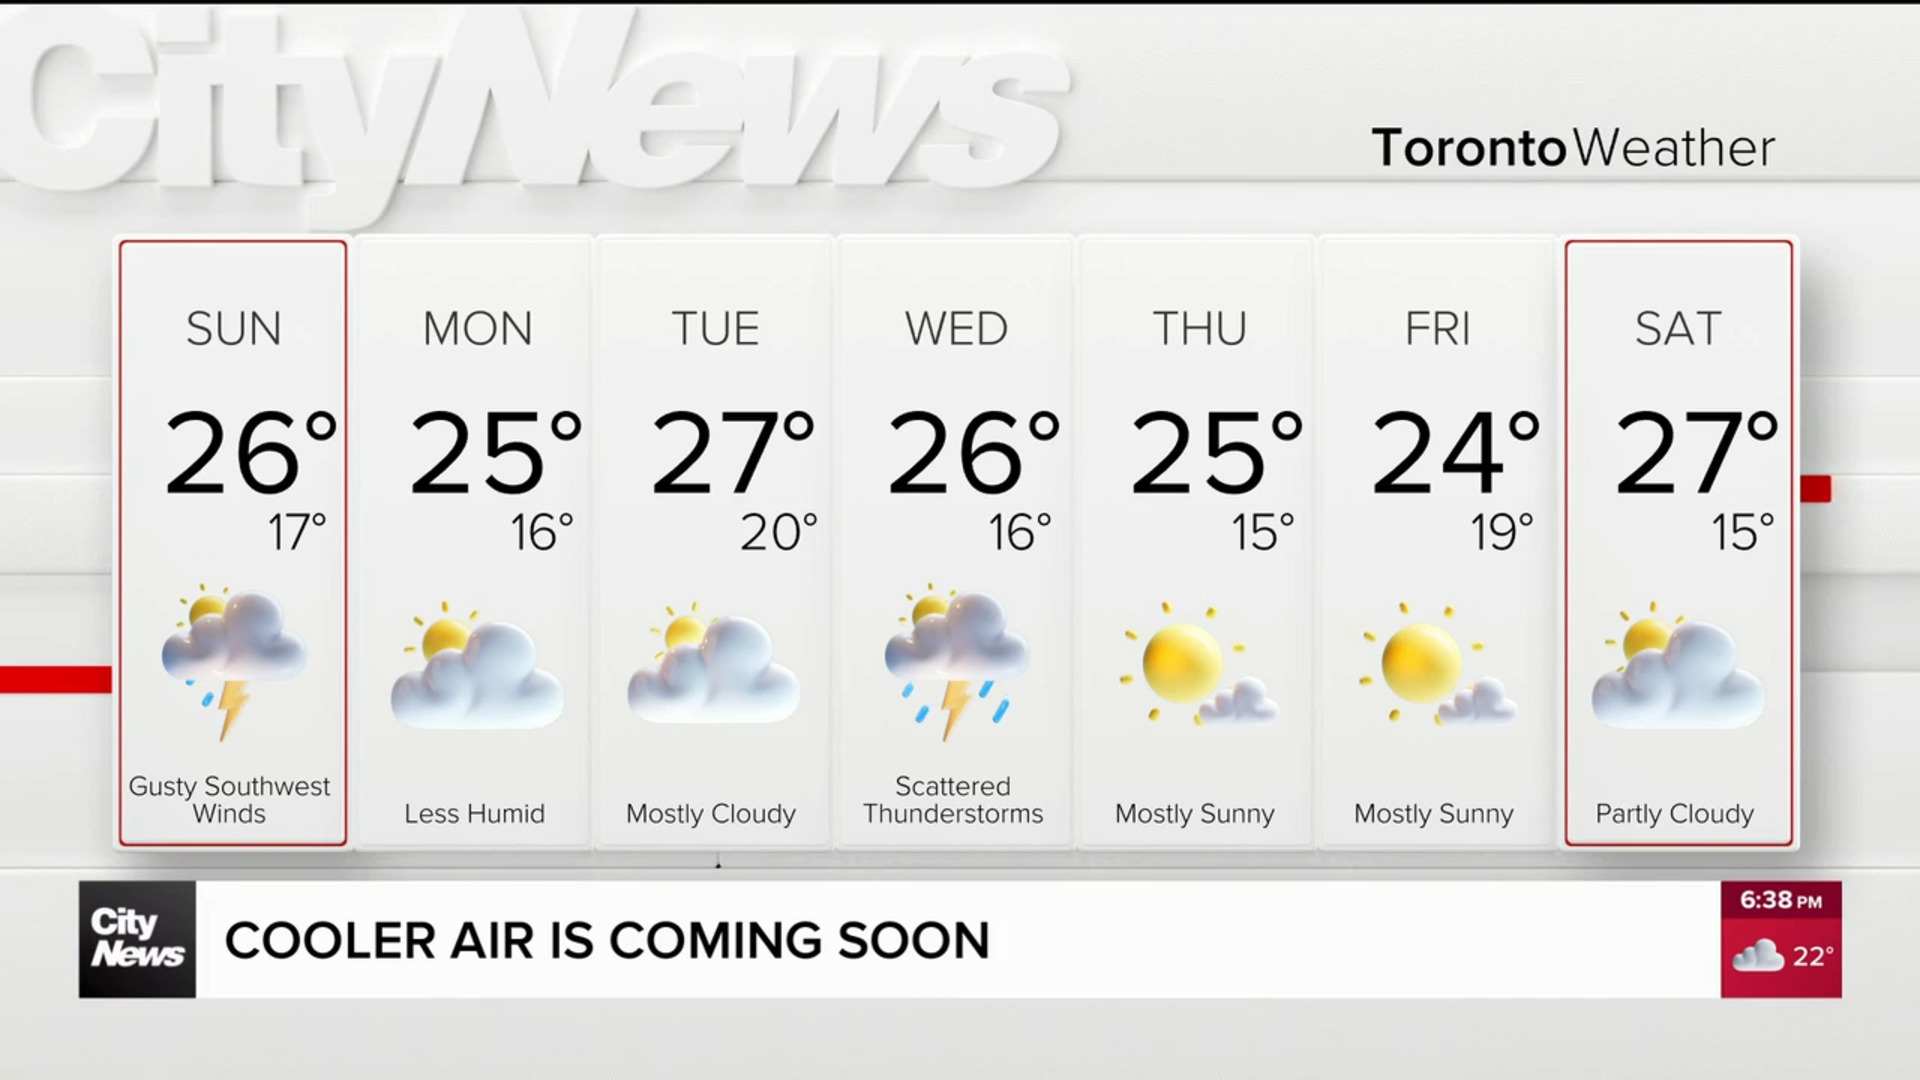 Cooler air is coming soon to the Greater Toronto Area